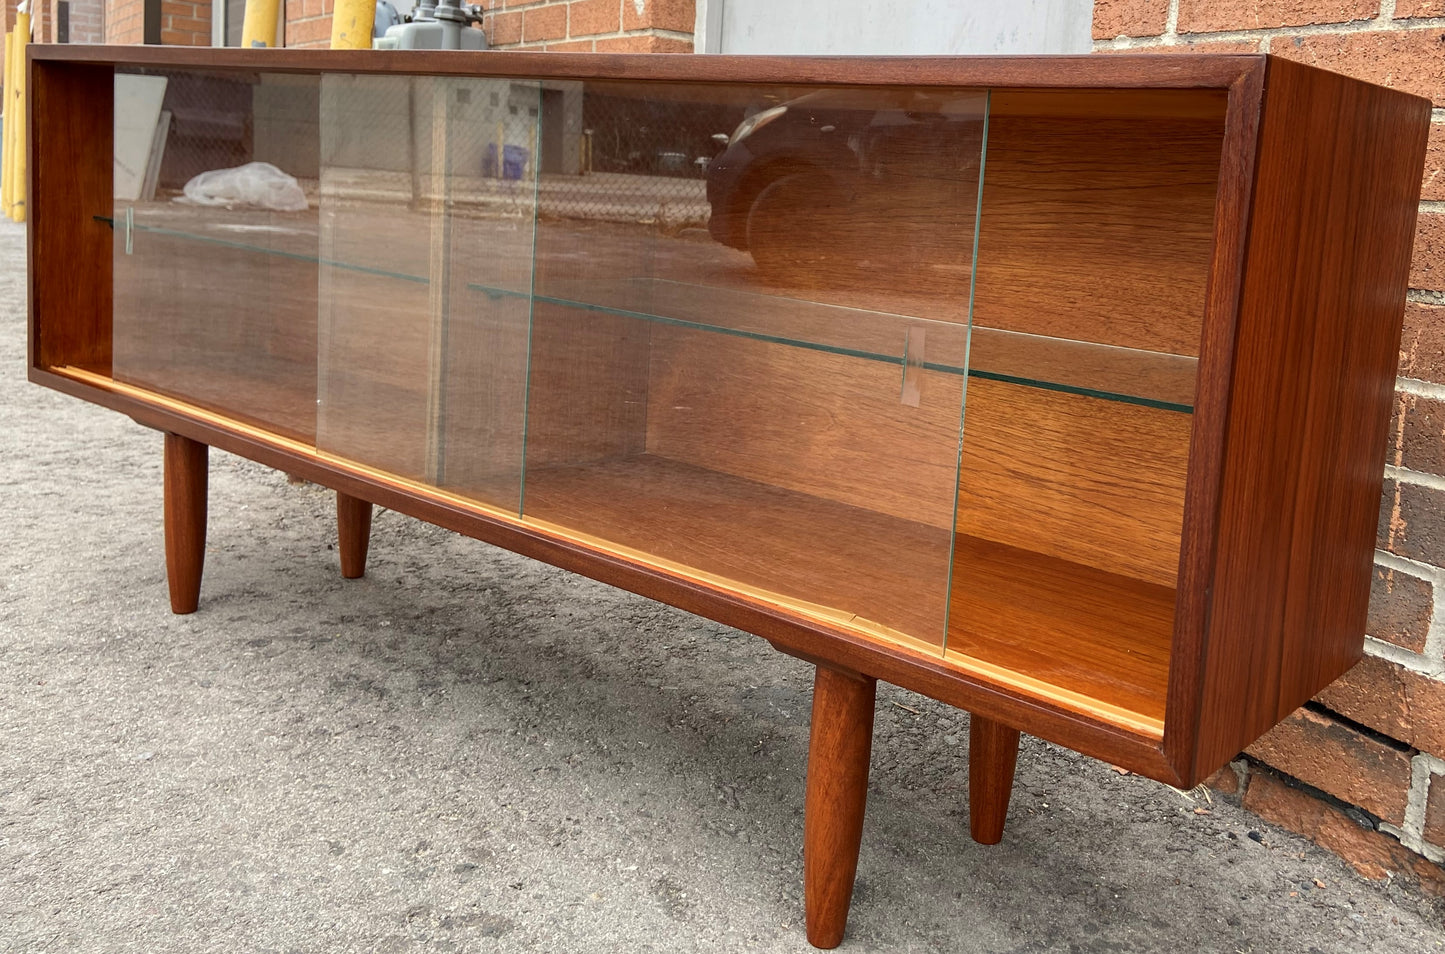 REFINISHED Mid Century Modern Teak Bookcase Display Media Console 60", Perfect